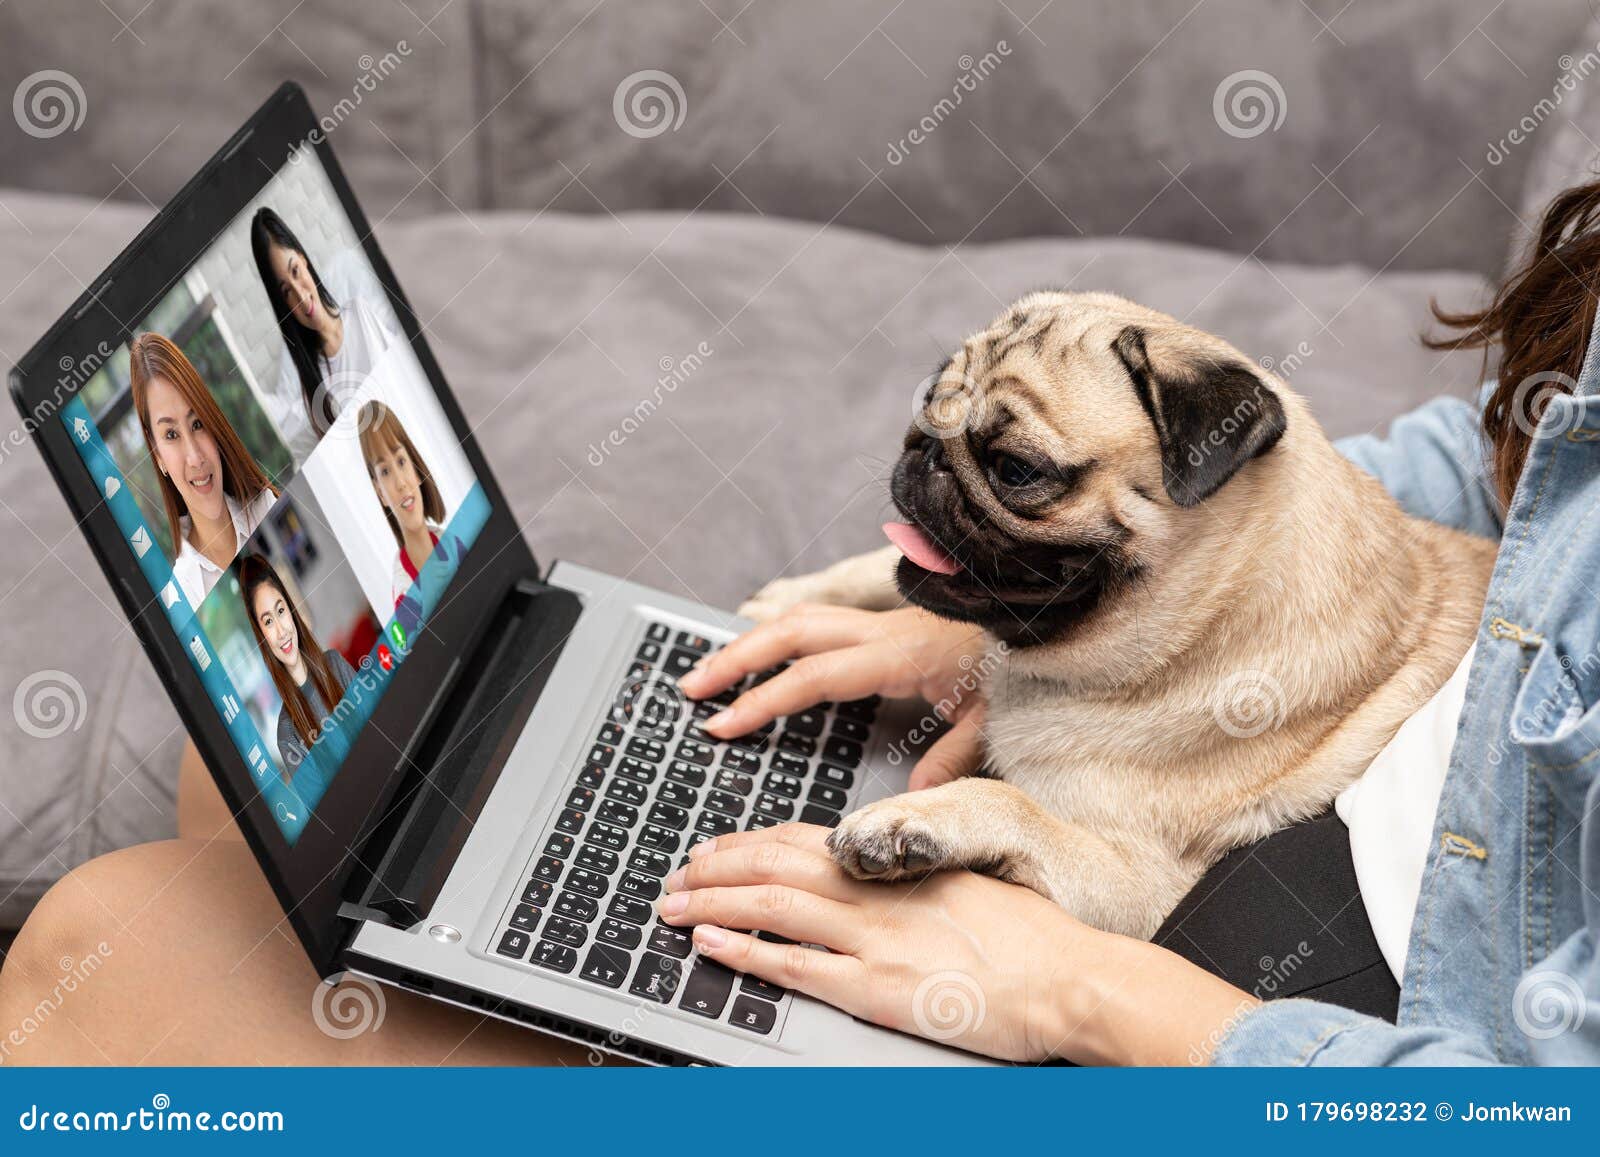 woman working on laptop with dog pug breed at home,woman vdo call conference to meeting business team